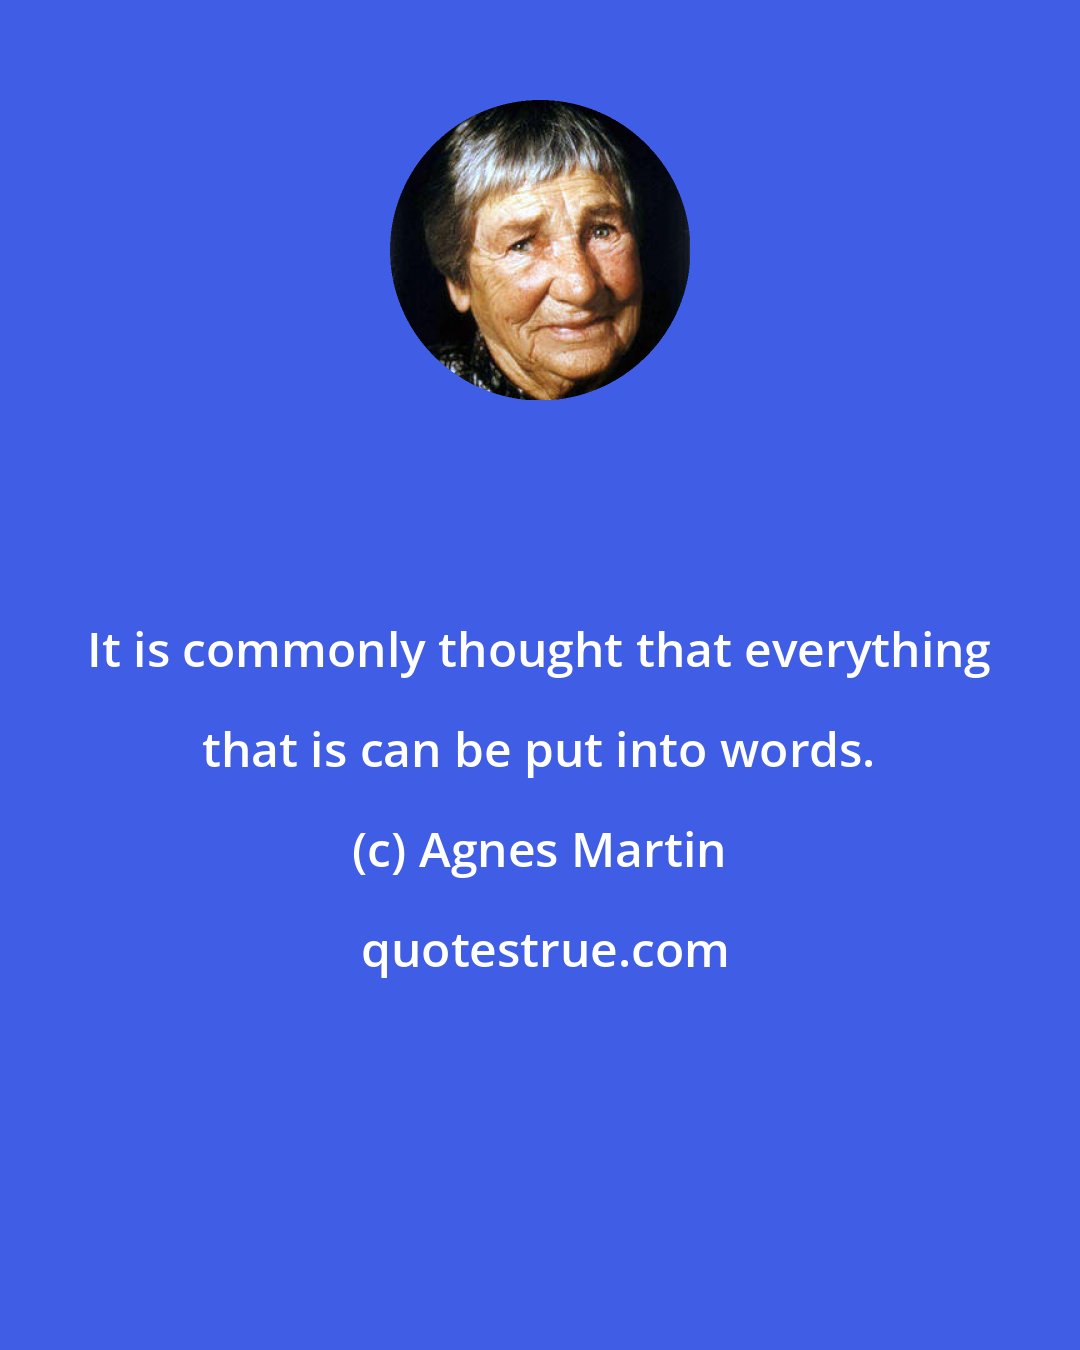 Agnes Martin: It is commonly thought that everything that is can be put into words.